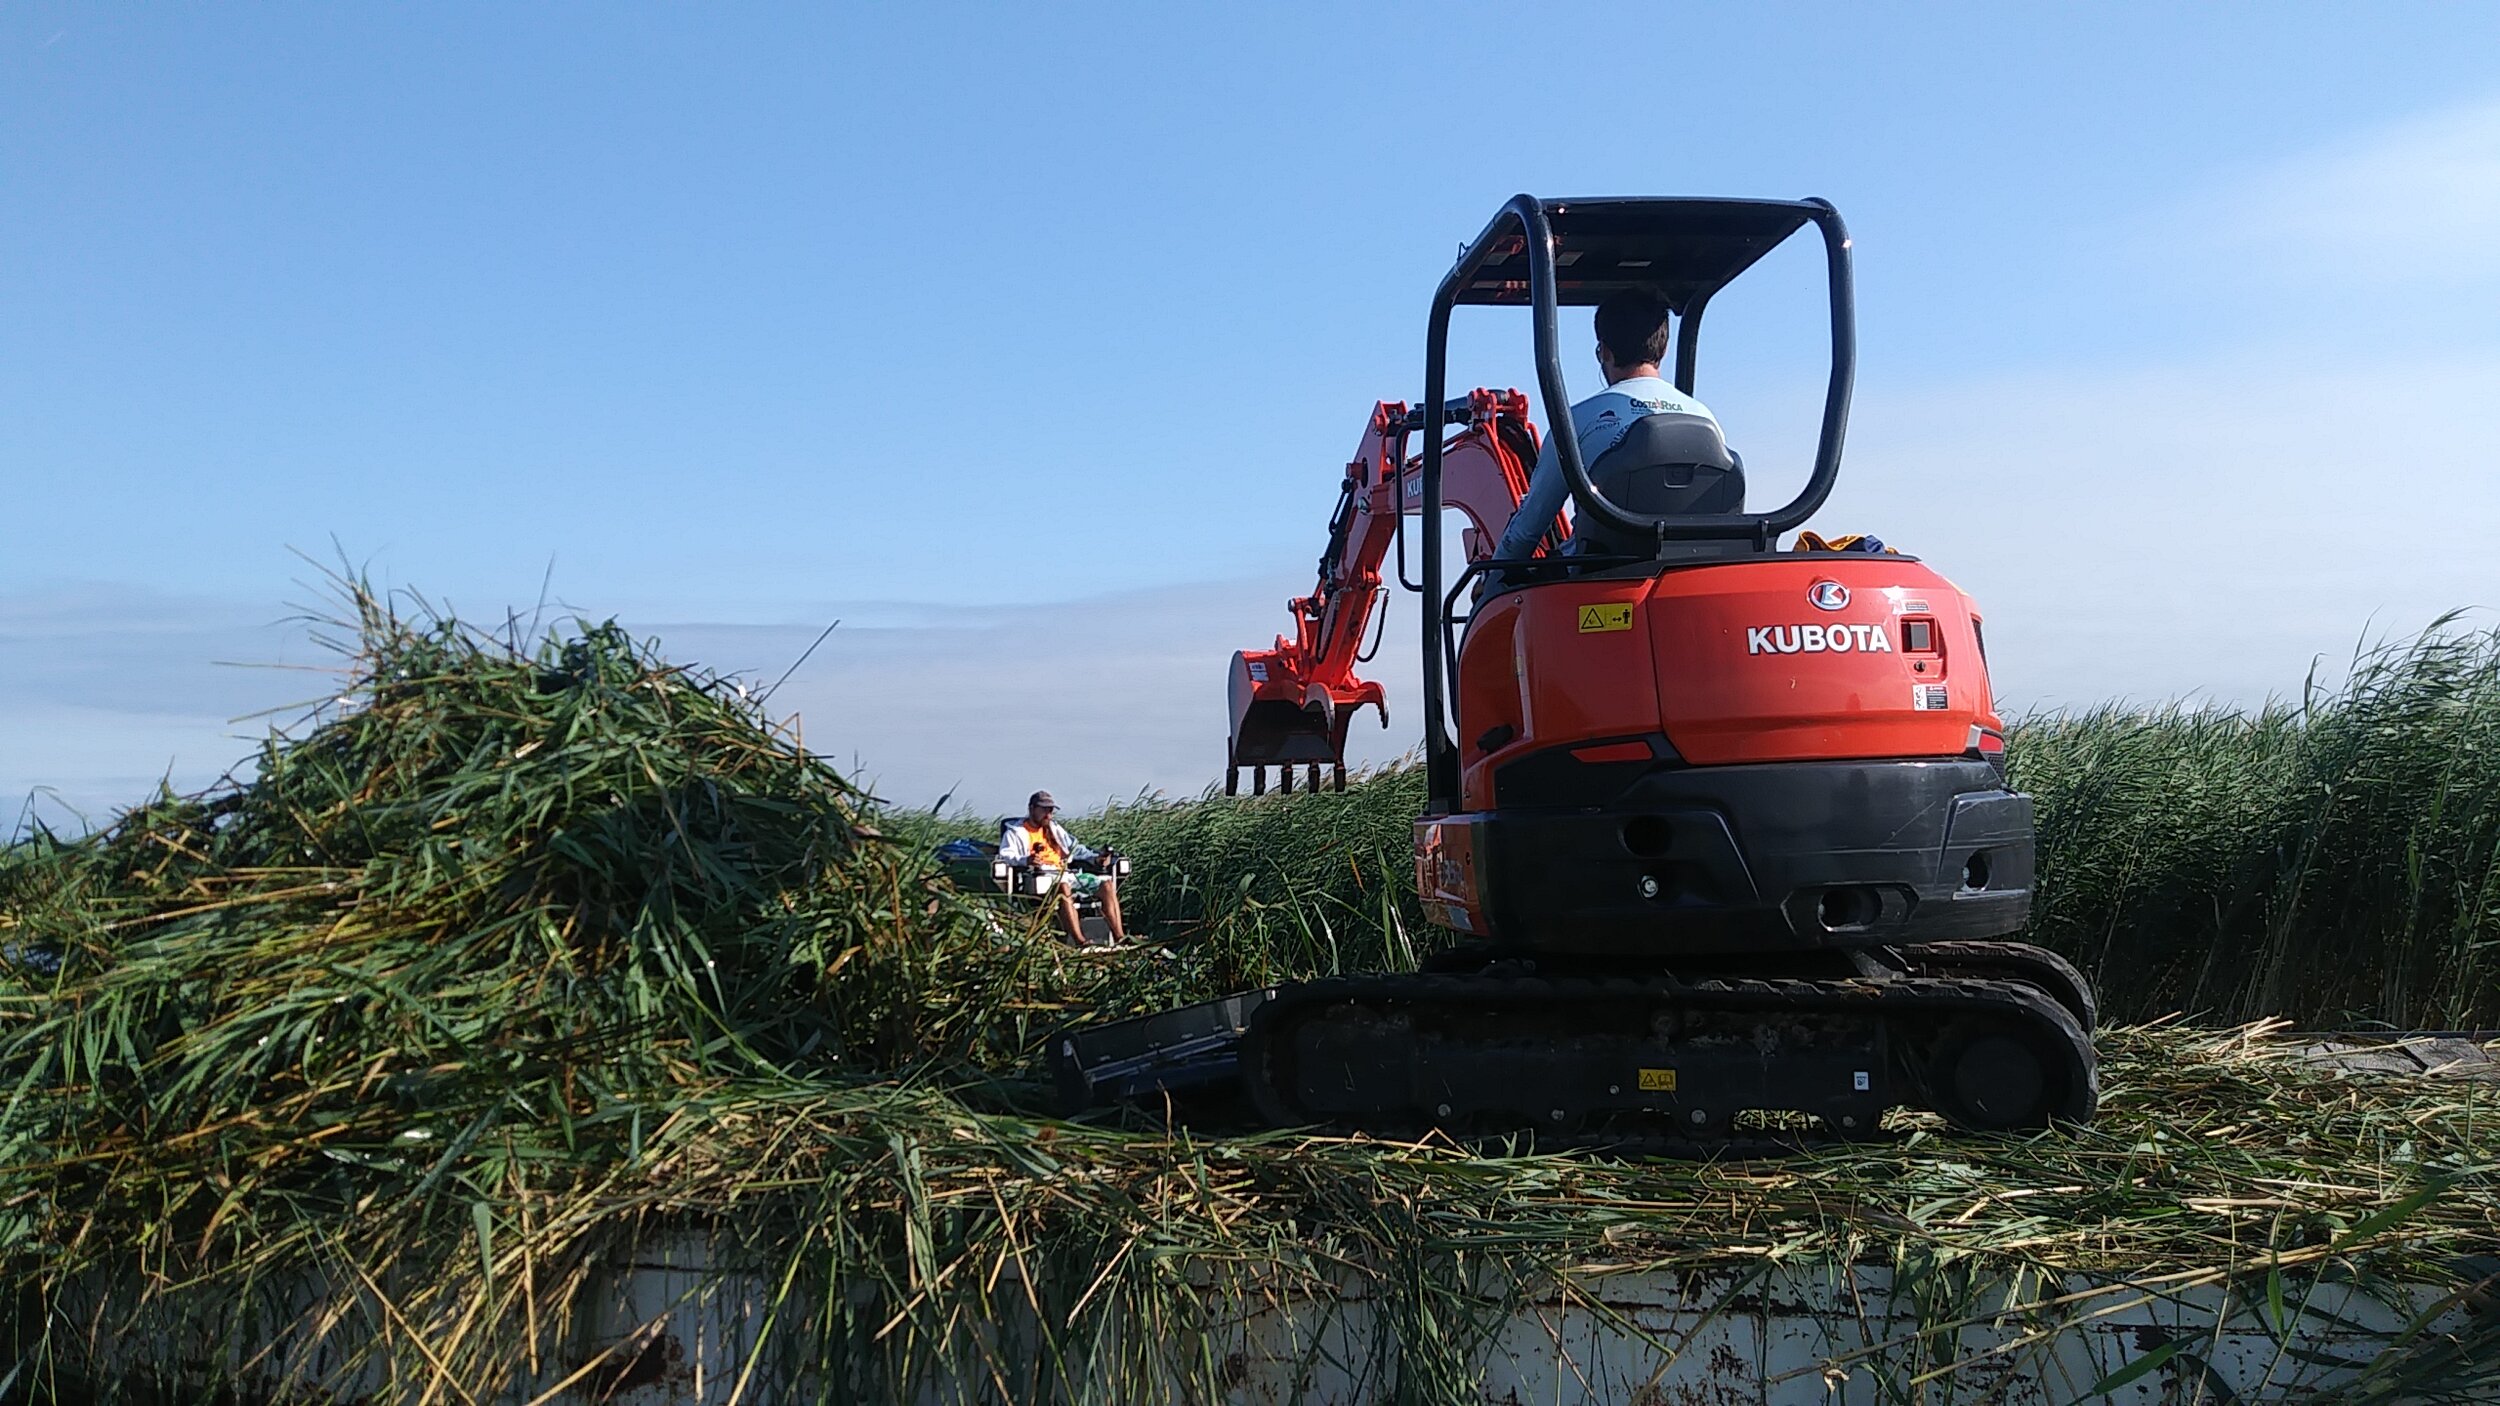 A truxor and the excavator working together to load Phragmites.